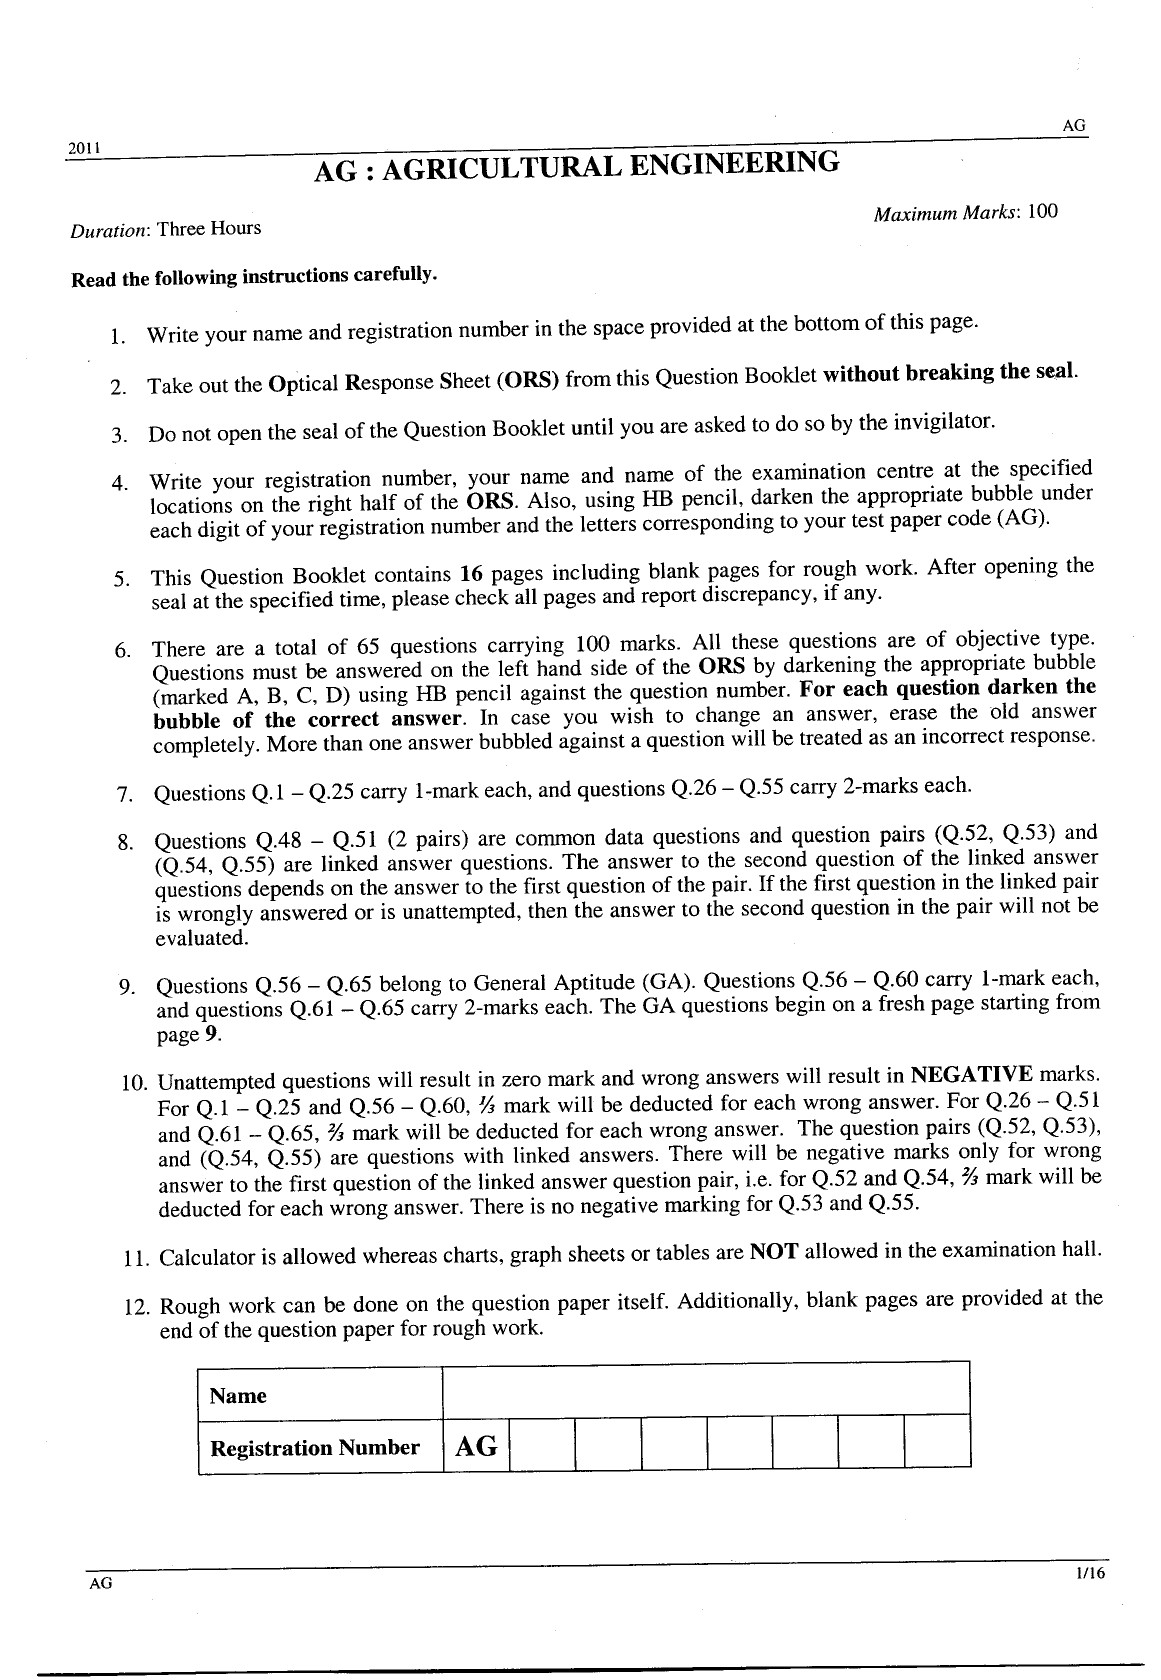 GATE Exam Question Paper 2011 Agricultural Engineering 1